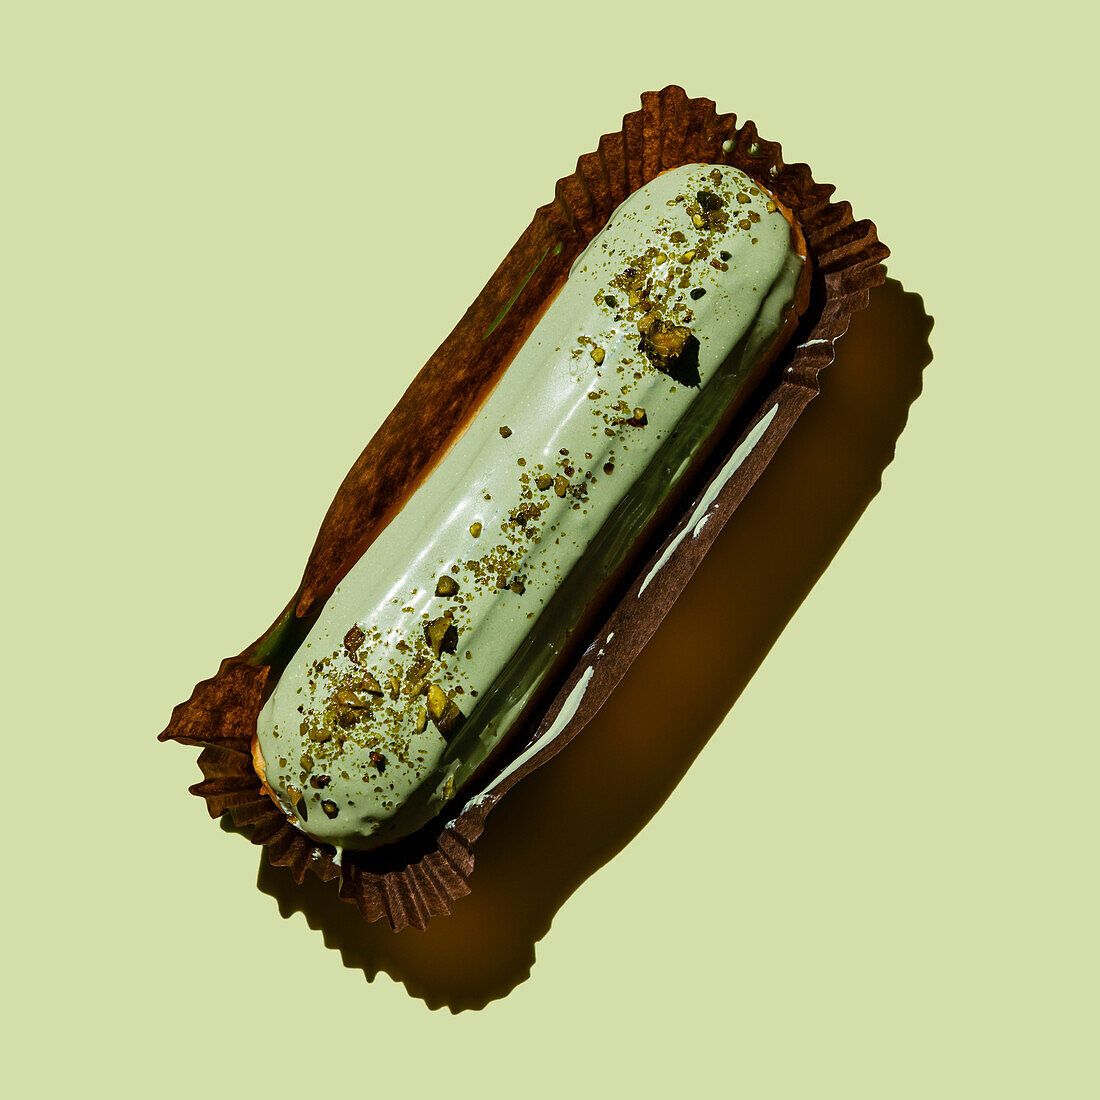 Pistachio eclair on a green background